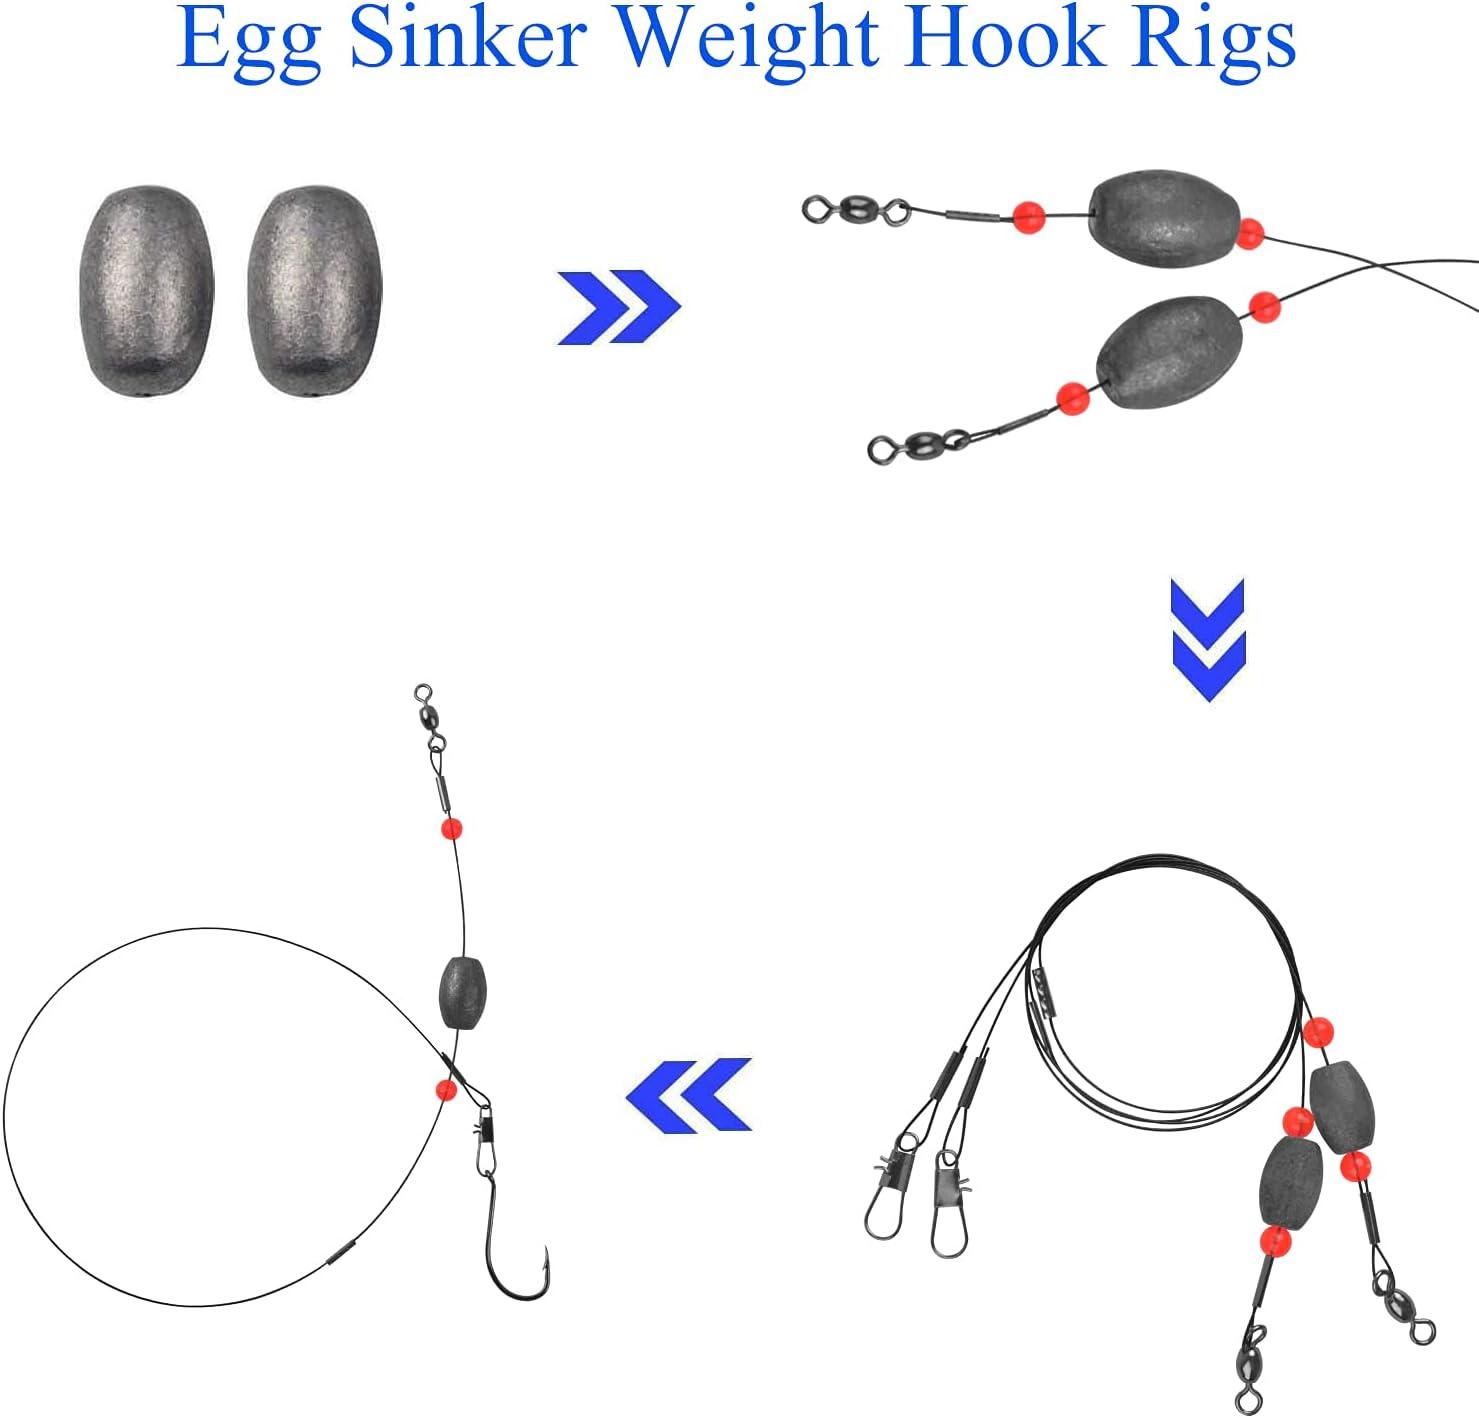 Fishing Weights Egg Weight Rig Carolina Rigs for Fishing Catfish Rig Fishing  Ready Rigs Fishing Leader with Weights Swivels Pre Rigged Carolina Rigs  Jetty Rig Flounder rig Fishing Grouper Rigs 0.75 oz_4pcs